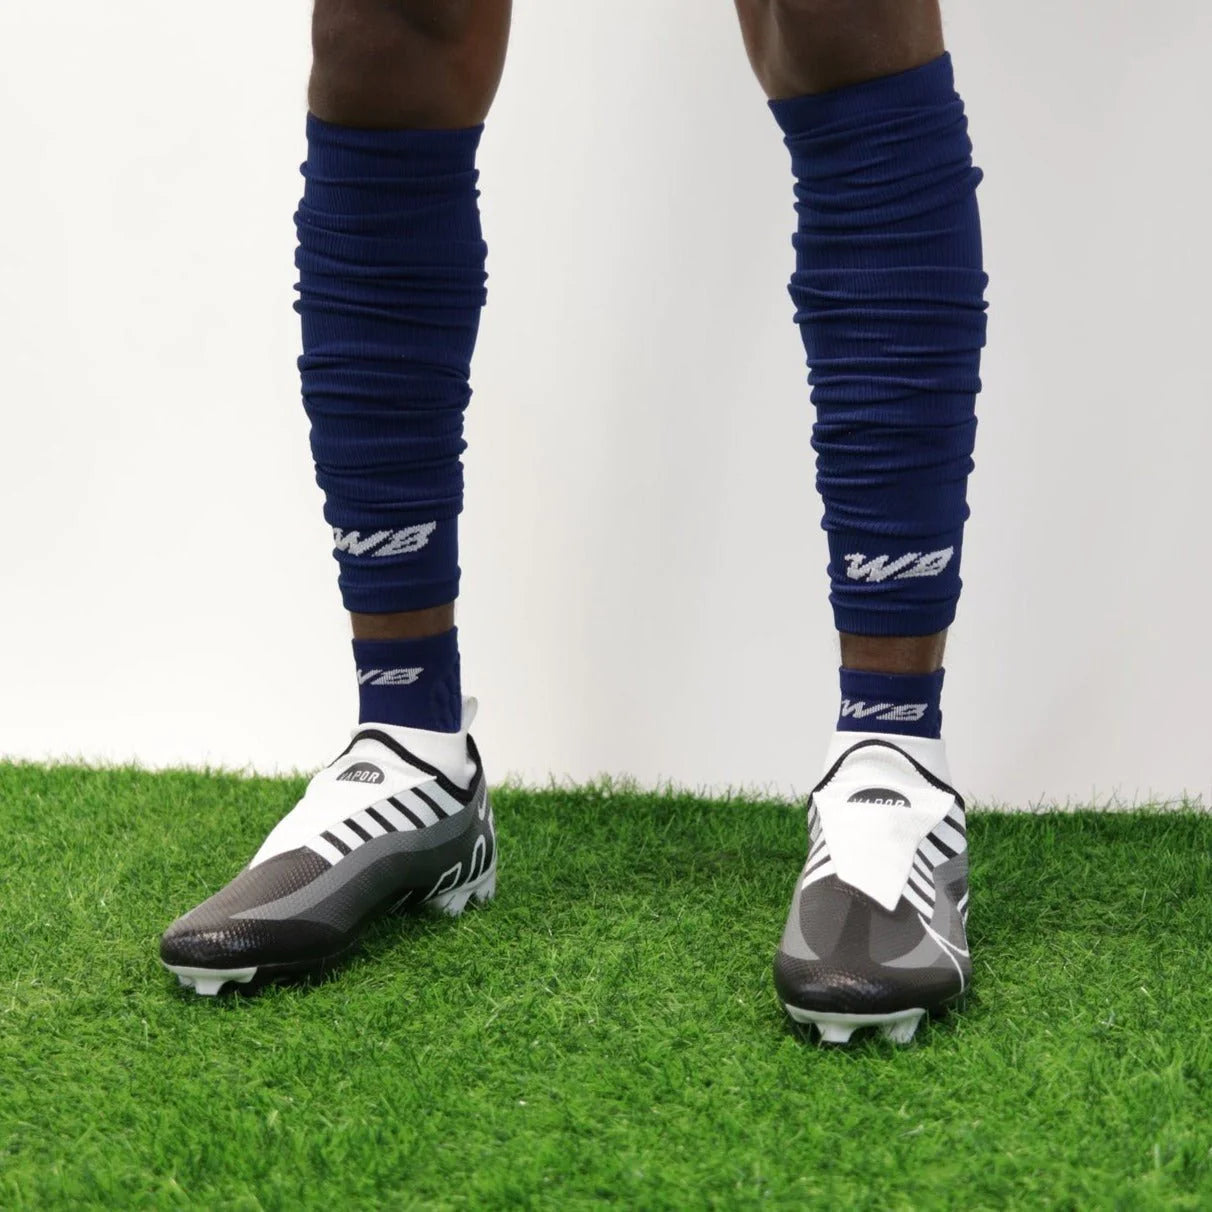 We Ball Sports Football Leg Sleeves Calf Compression for Men